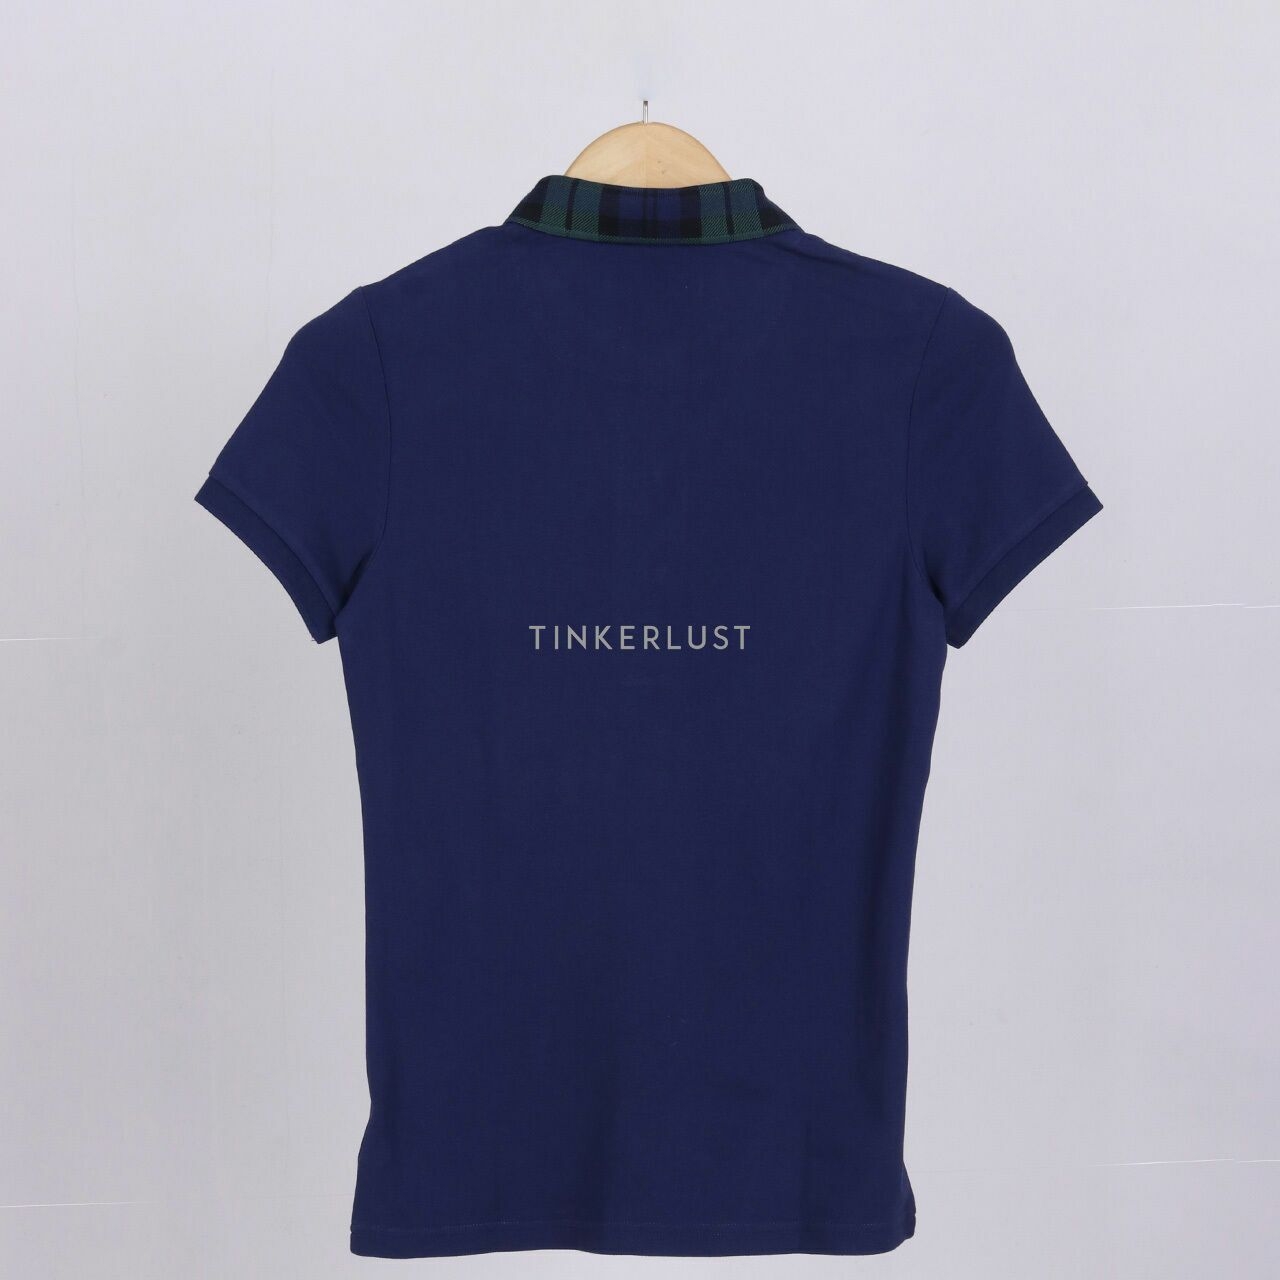 Fred Perry Blue Polo Shirt